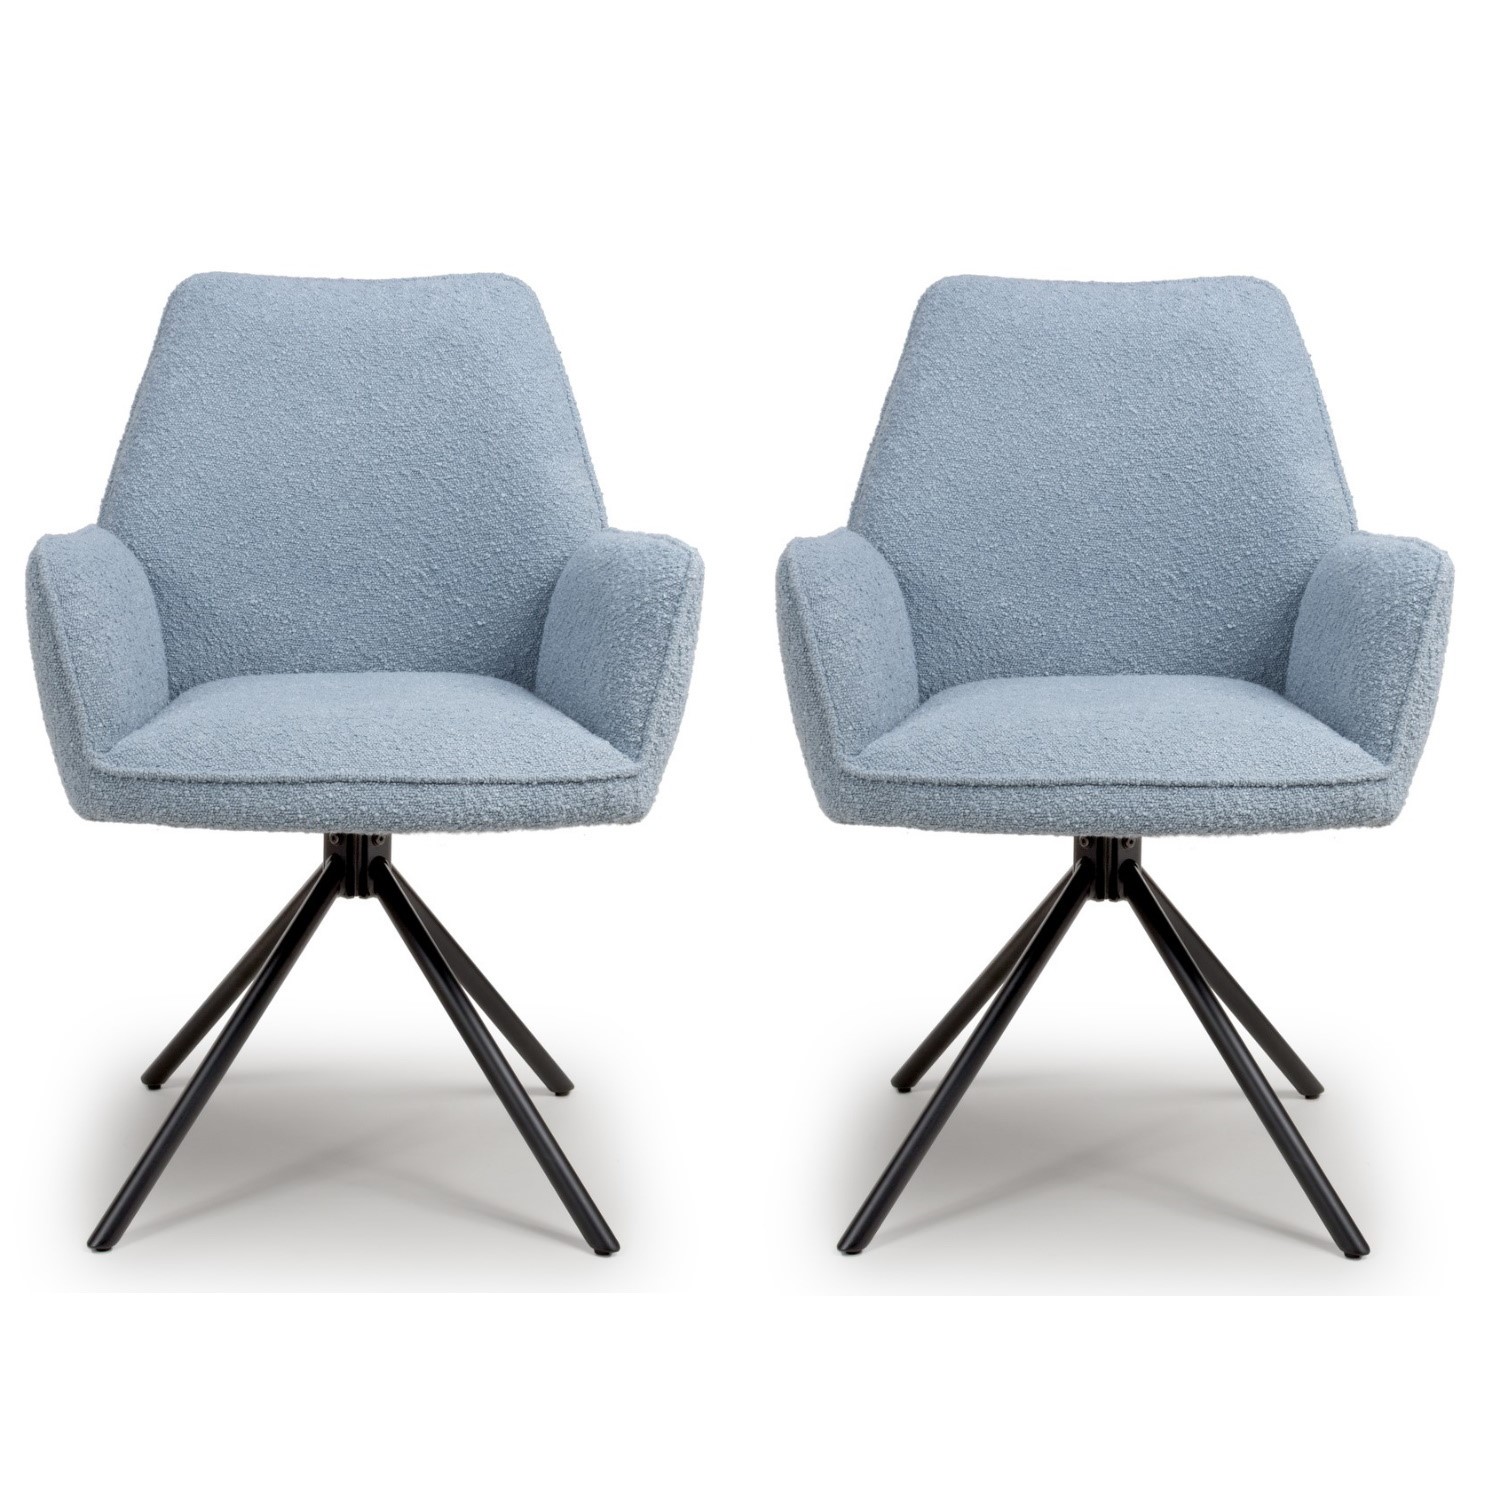 Photo of Set of 2 blue boucle dining chairs - alva